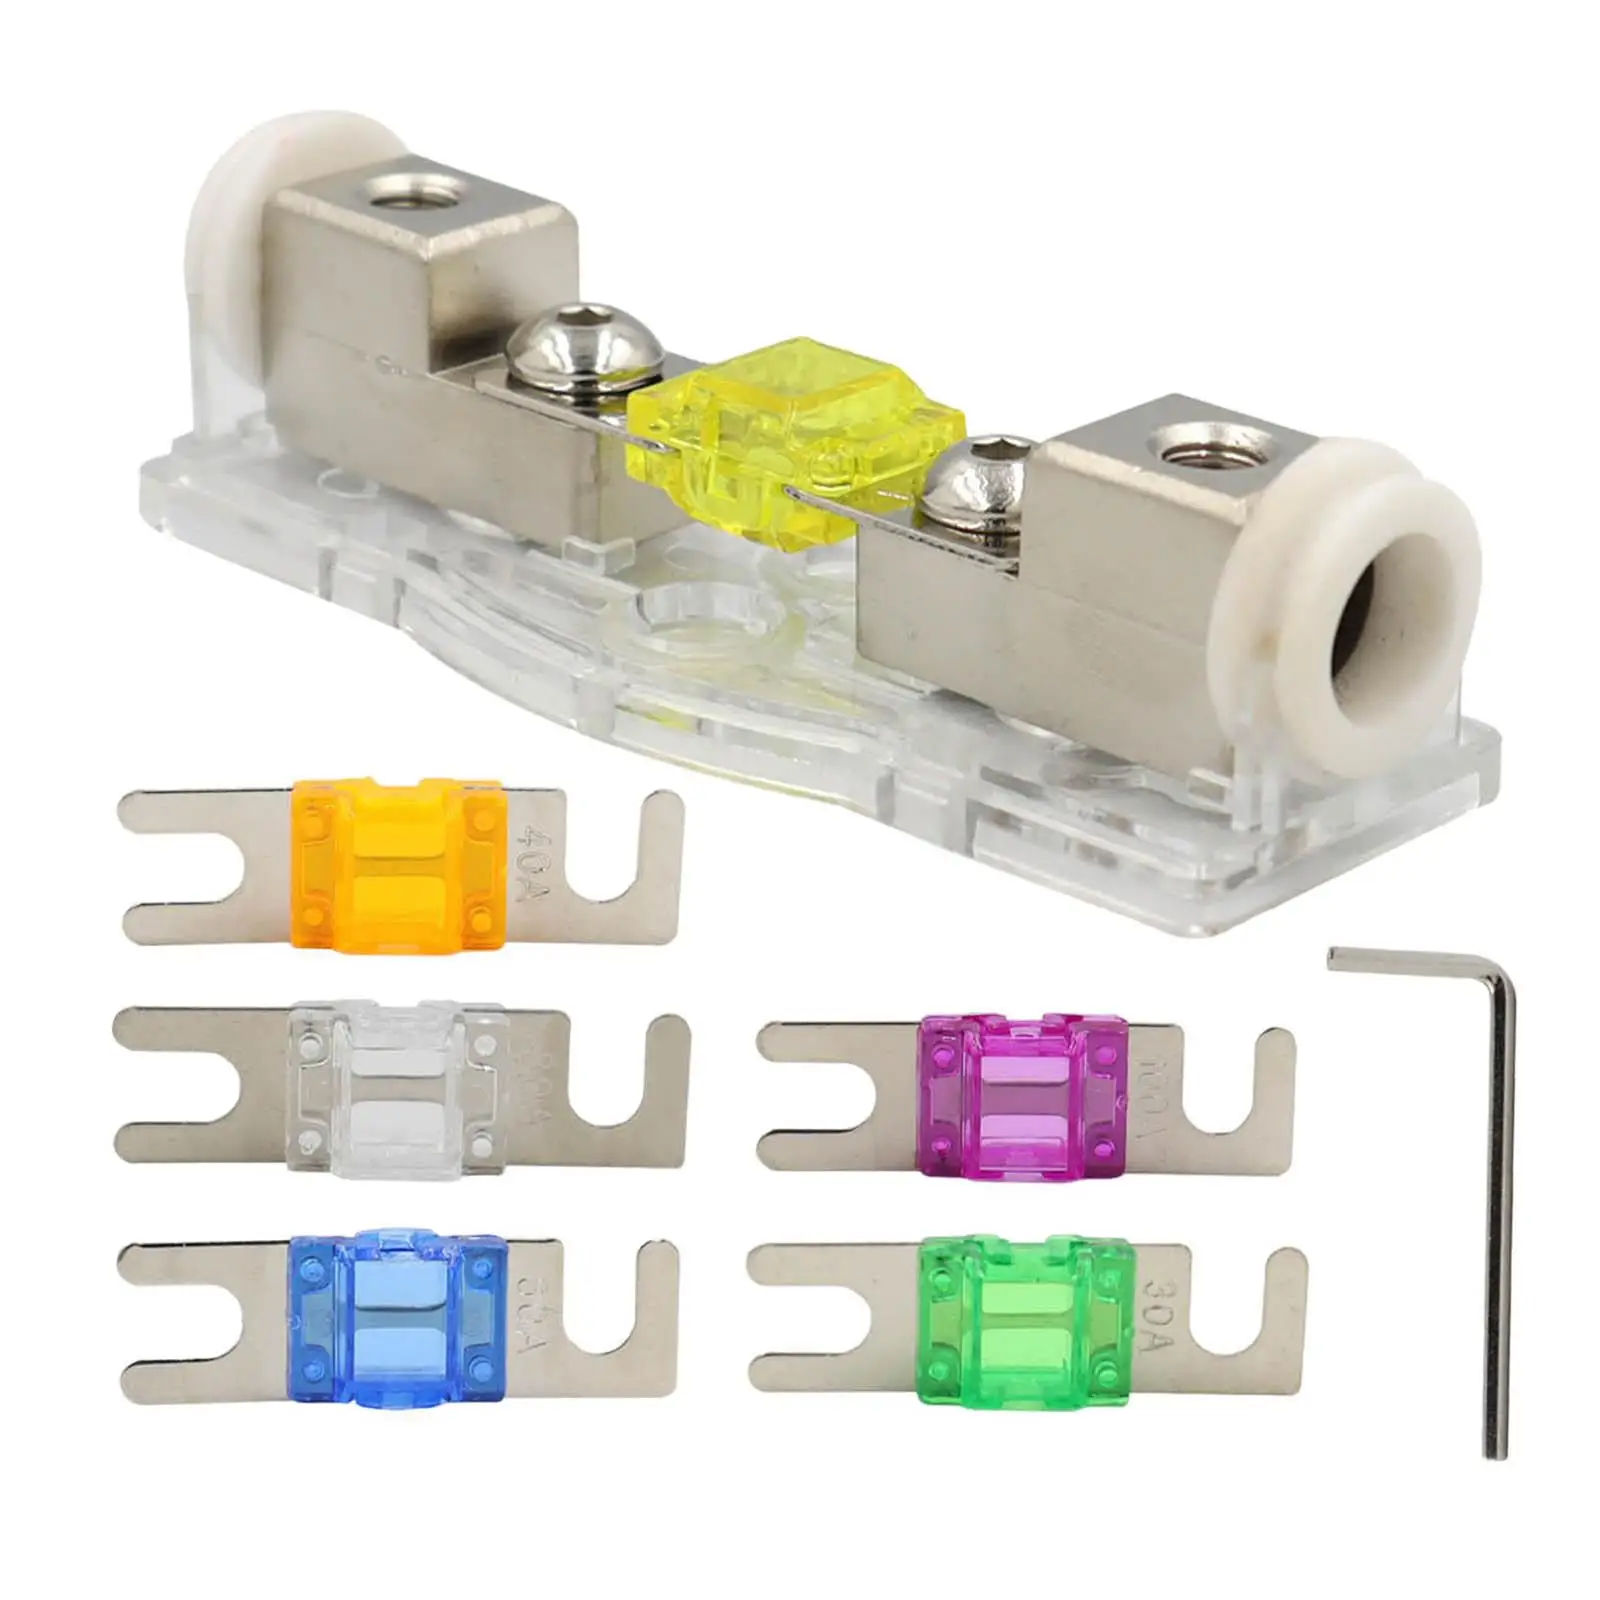 120A Anl Fuse Holder with Fuse Wire Inline Fuse 12-32V Reset Fuse Holder